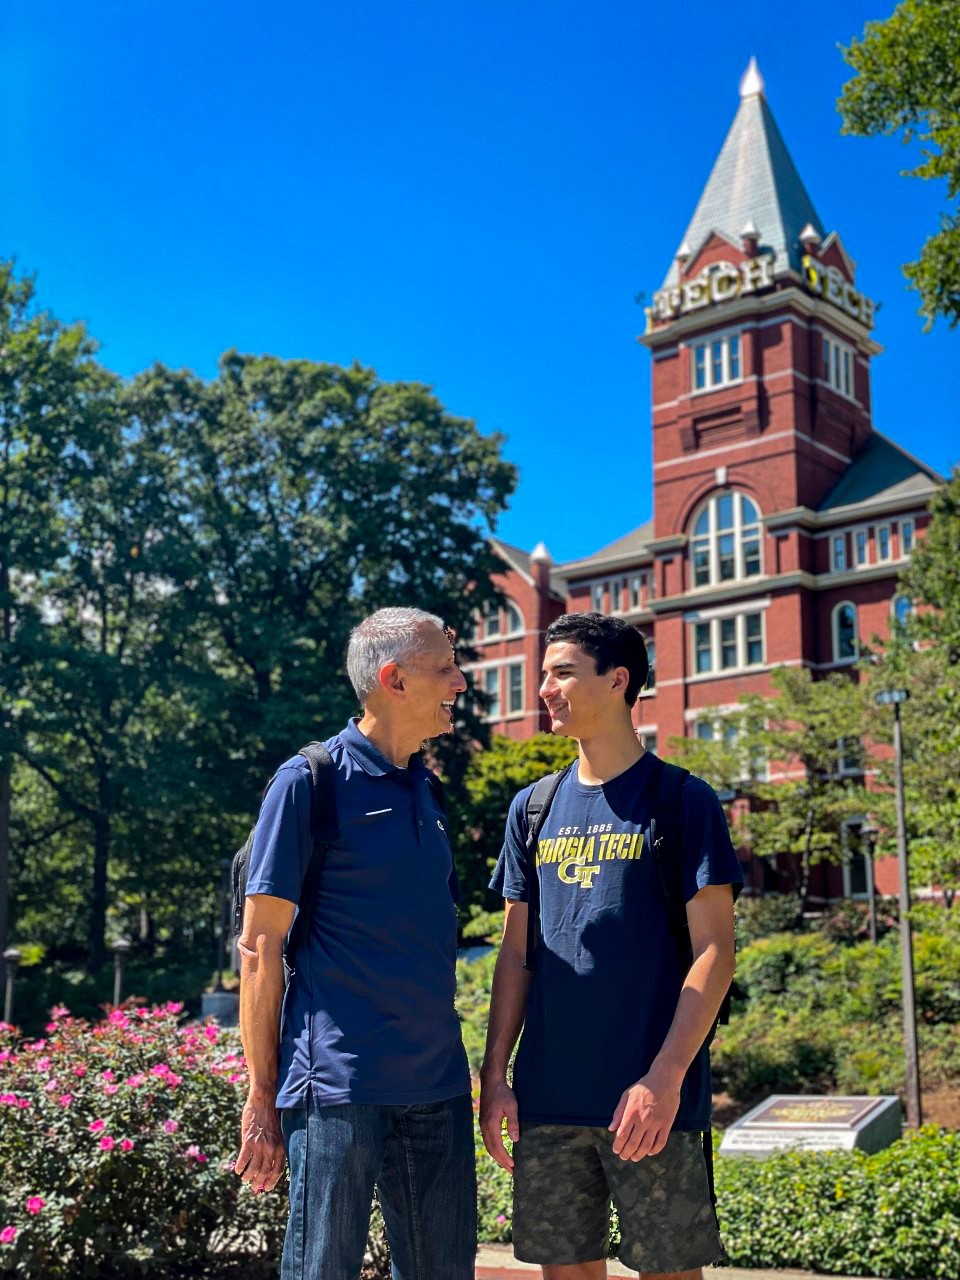 Juan Villarreal came to Georgia Tech to visit his son, Patrick. Like most parents, he wanted to see how his son was adjusting to his first years in college. He didn't expect to end up enrolling in classes, though.